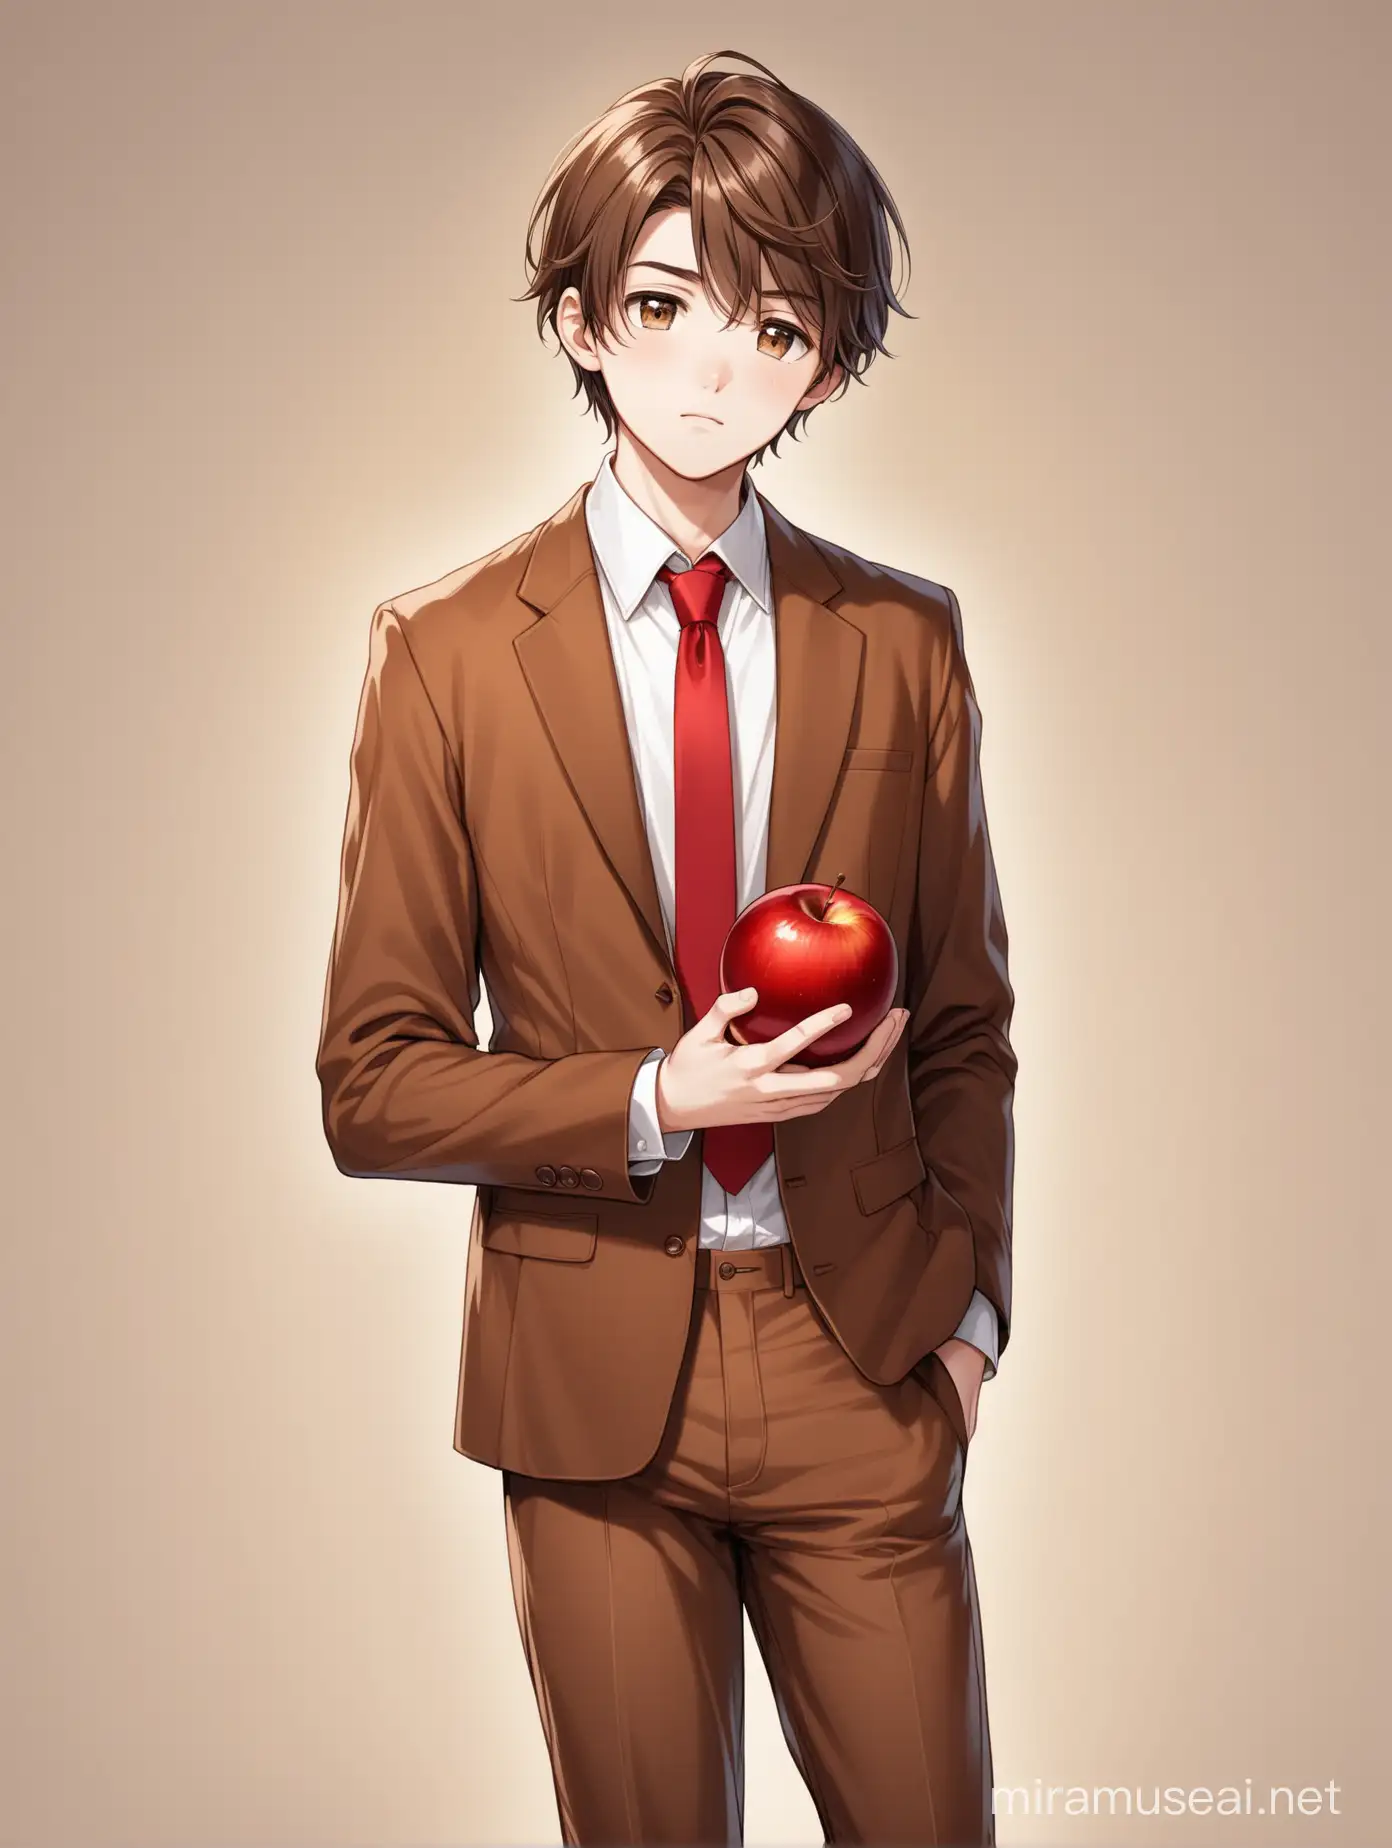 A handsome teenager with brown hair, brown eyes, and a sleepy look. He wears a white shirt, red tie, brown suit, brown pants, and brown shoes. He holds an red apple.